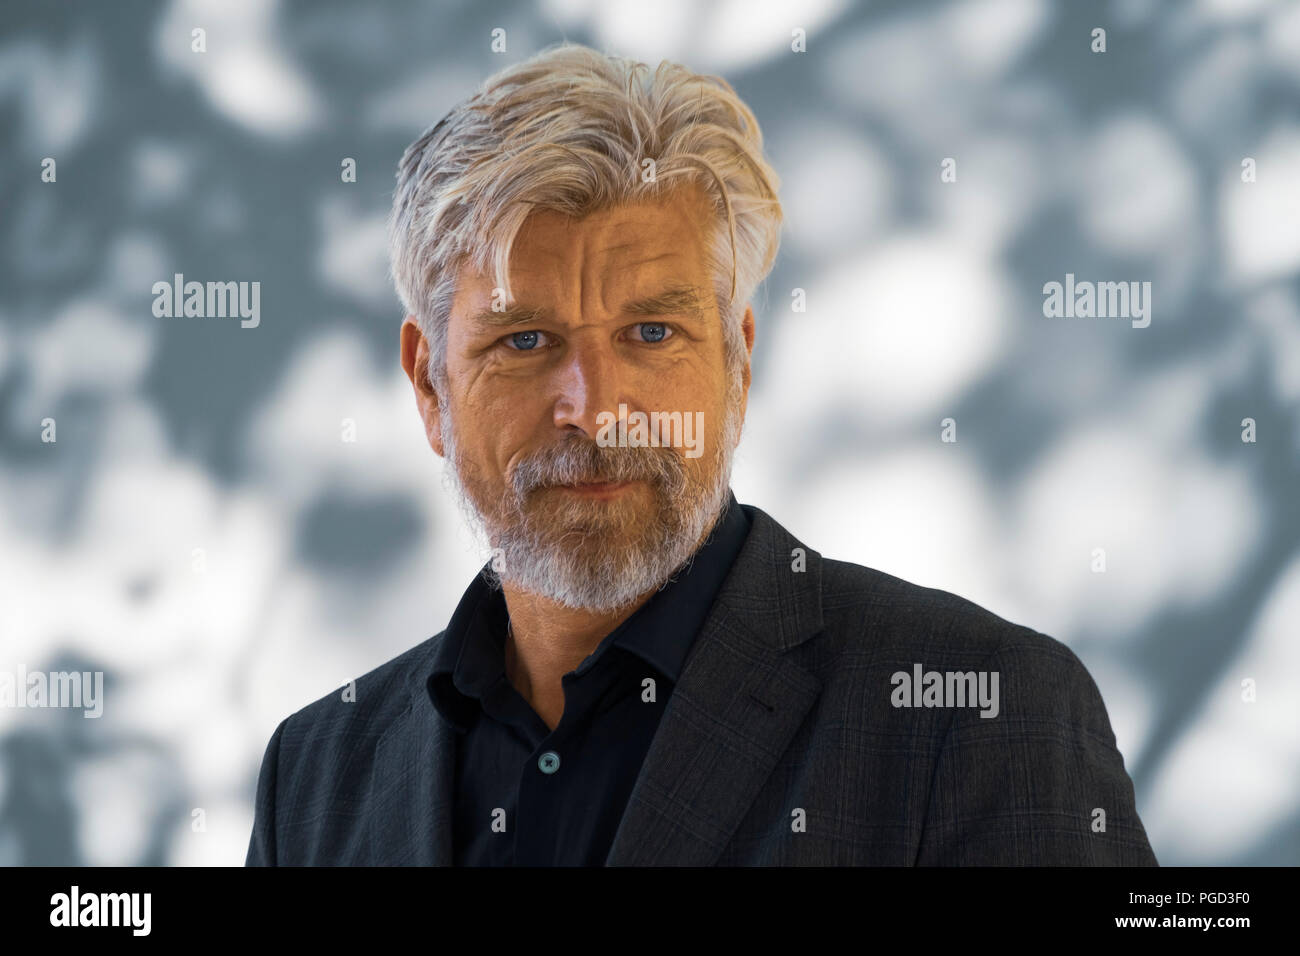 Edinburgh, Scotland, UK. 25 August, 2018. Pictured; Karl Ove Knausgaard is widely regarded as one of the world's finest living writers and is at the Festival as a Festival headliner to launch the English translation of the final book 'The End', in his autobiographical series; My Struggle'. Credit: Iain Masterton/Alamy Live News Stock Photo